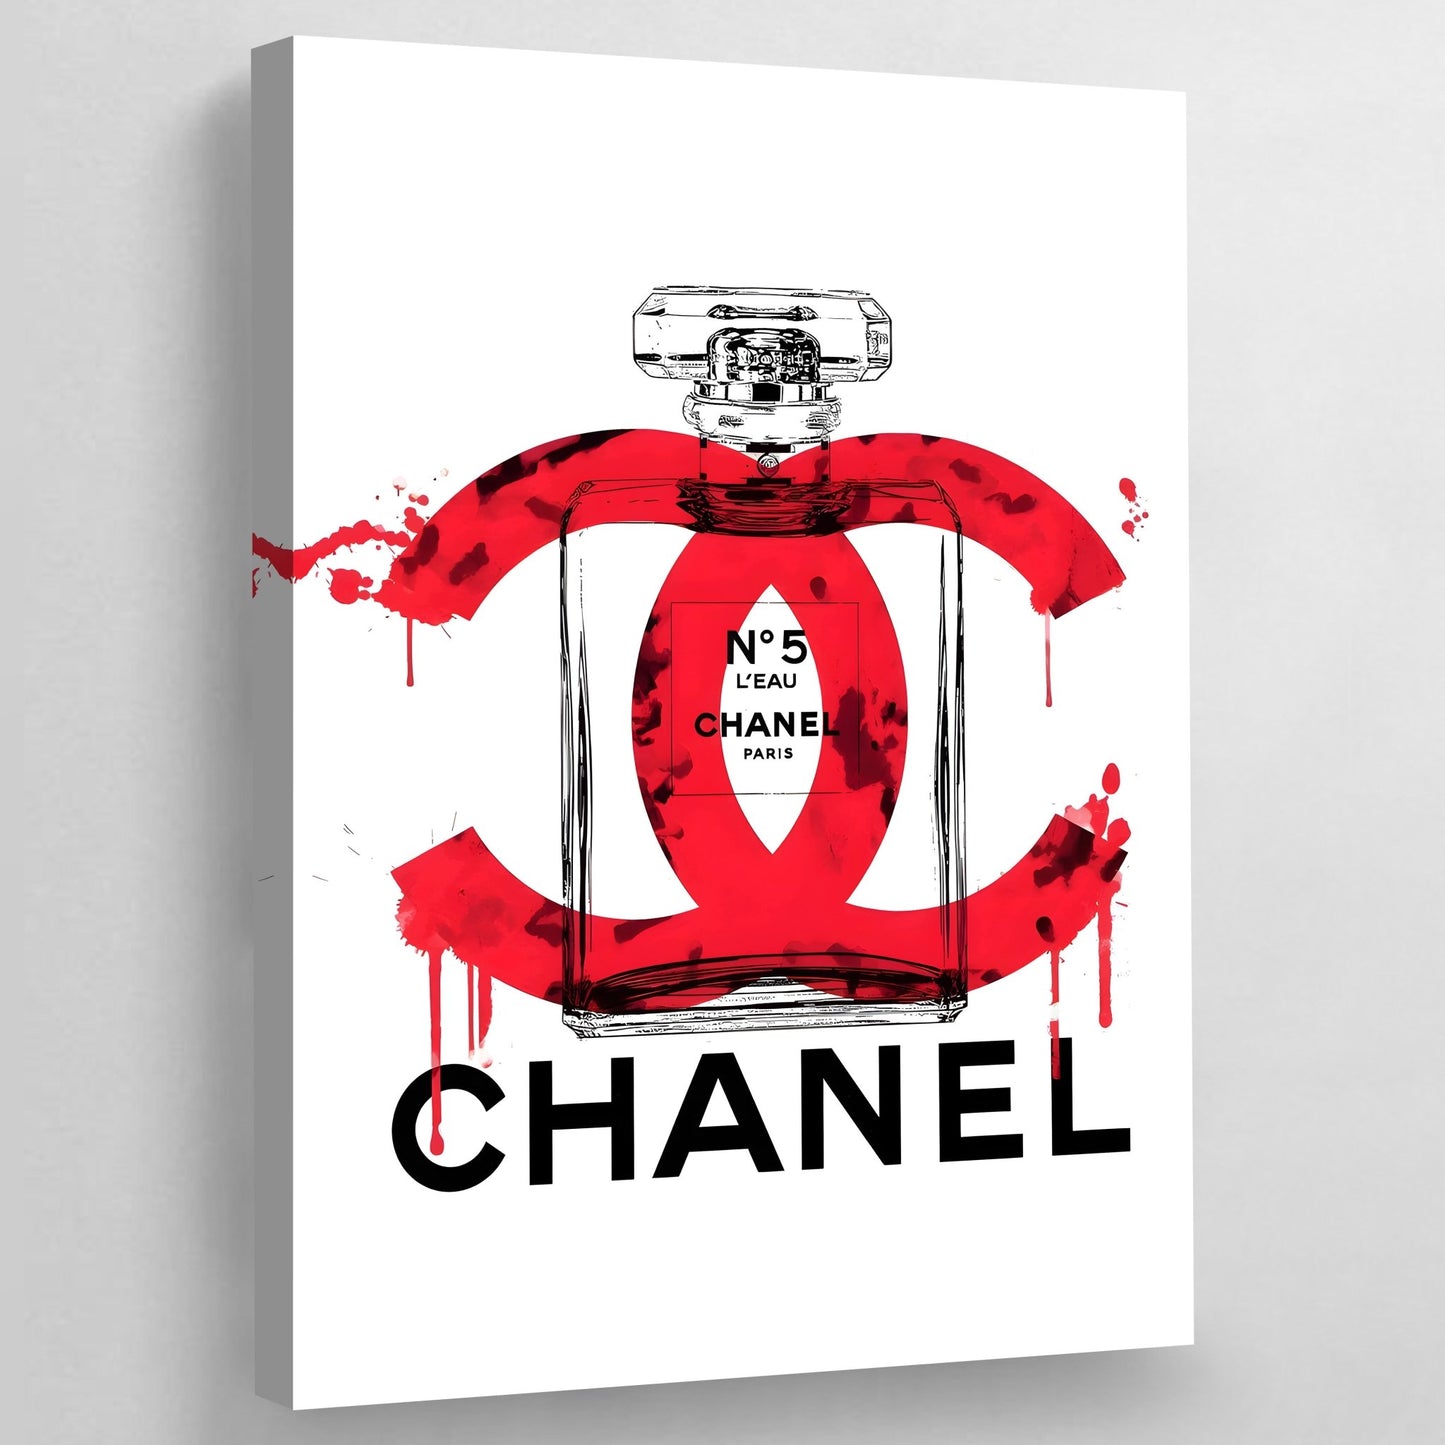 Wall Decor, Chanel X Louis Vuitton Painting